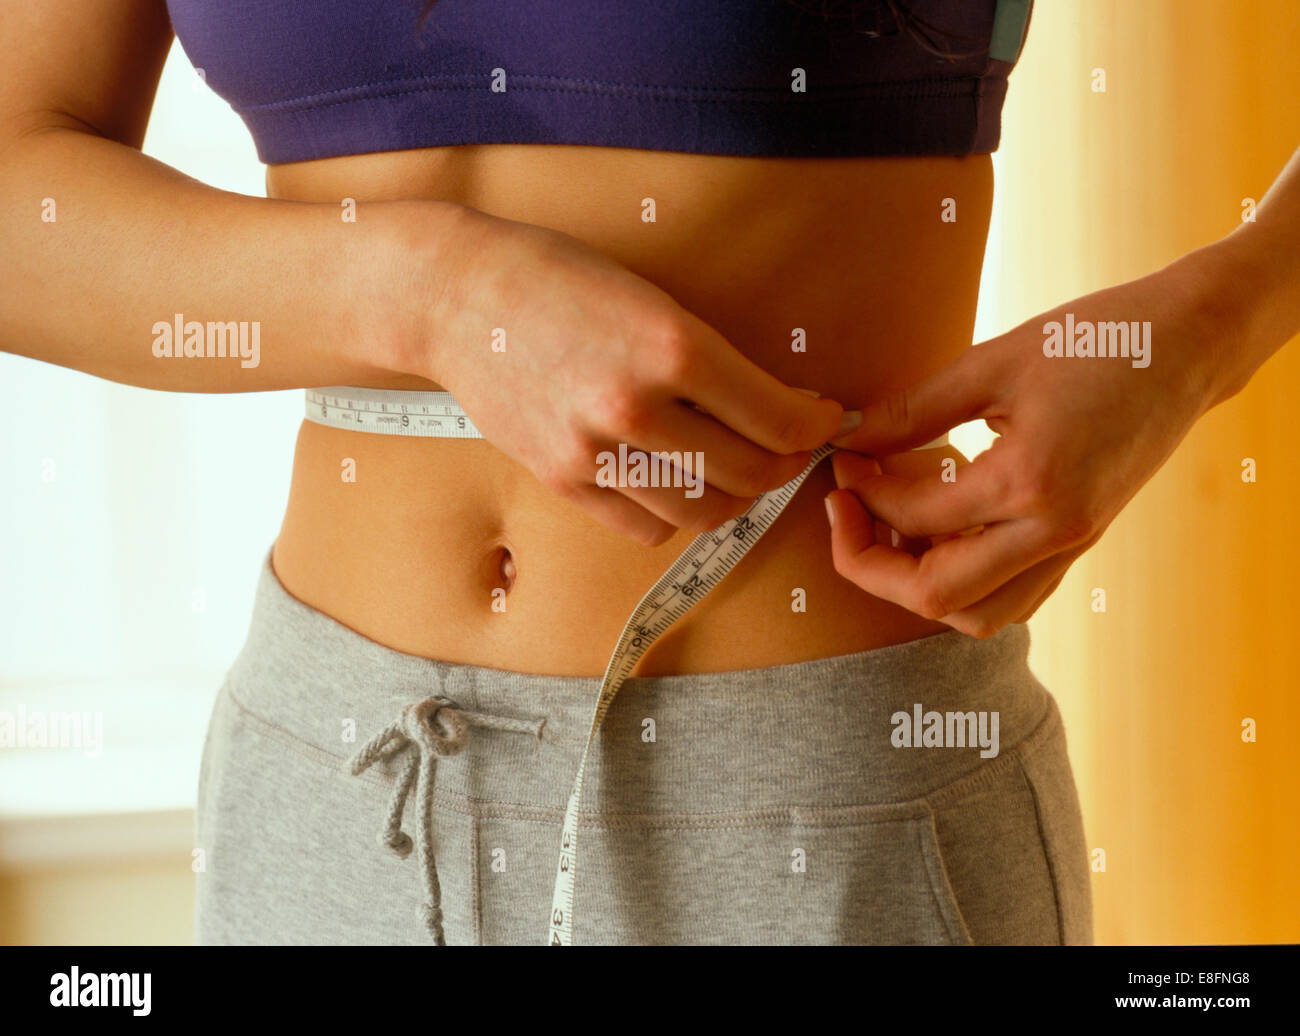 Woman measuring her waist size with a tape measure - StockFreedom